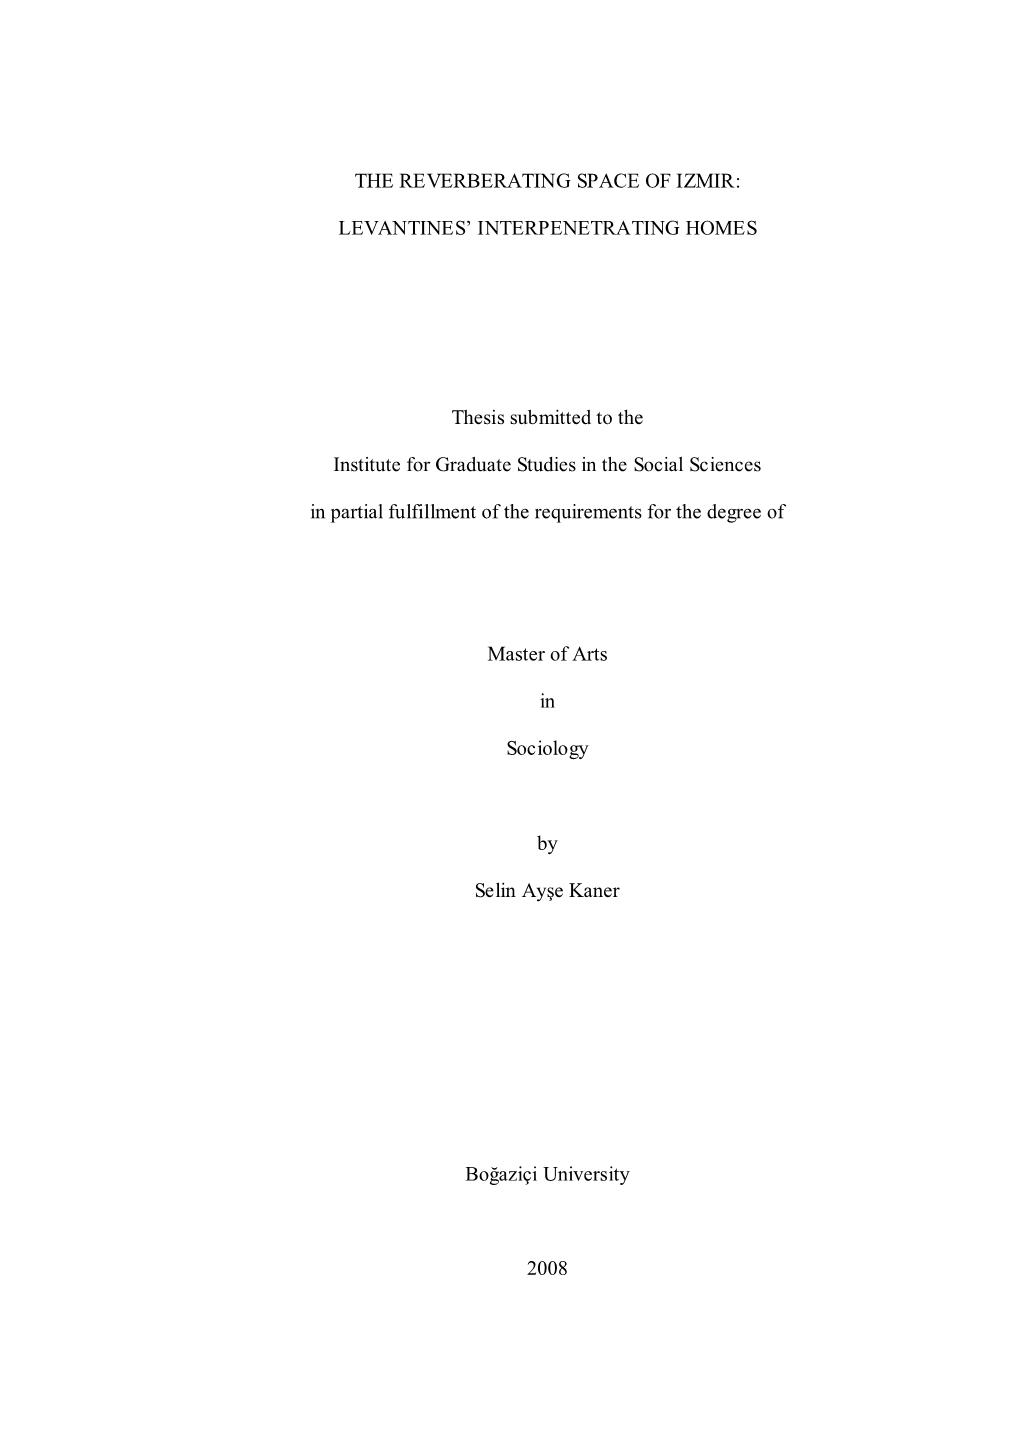 THE REVERBERATING SPACE of IZMIR: LEVANTINES' INTERPENETRATING HOMES Thesis Submitted to the Institute for Graduate Studies In